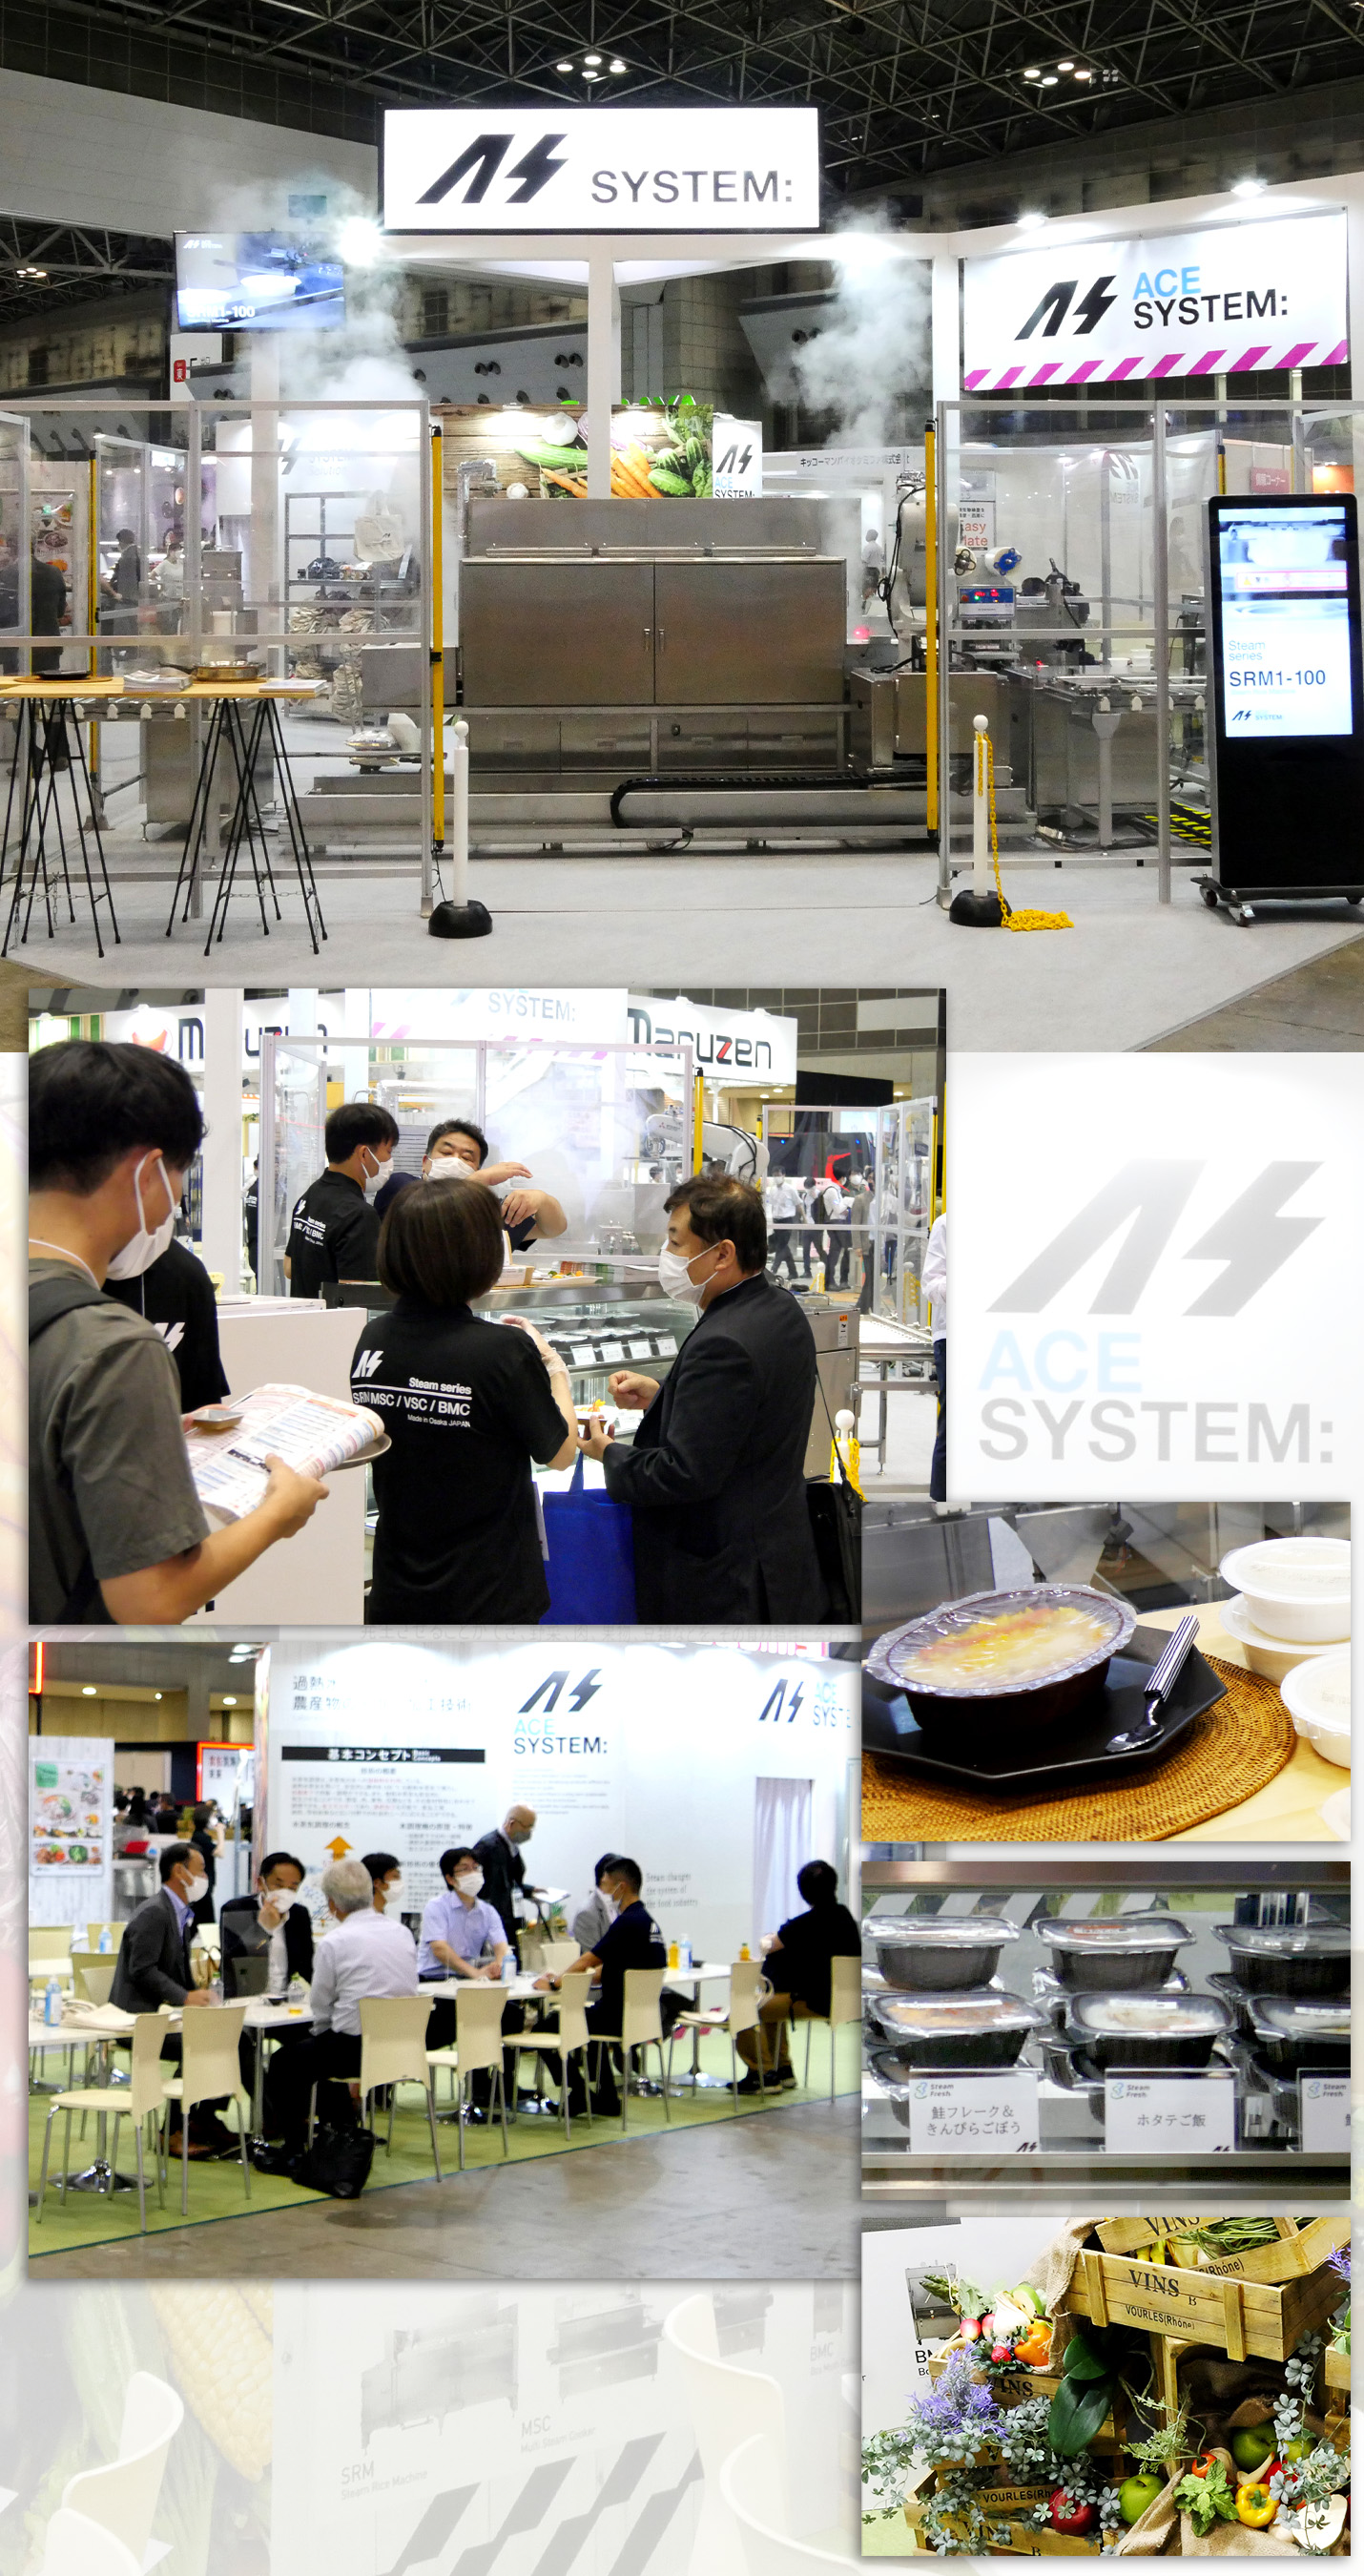 Exhibition 2022 FOOD SYSTEM SOLUTION